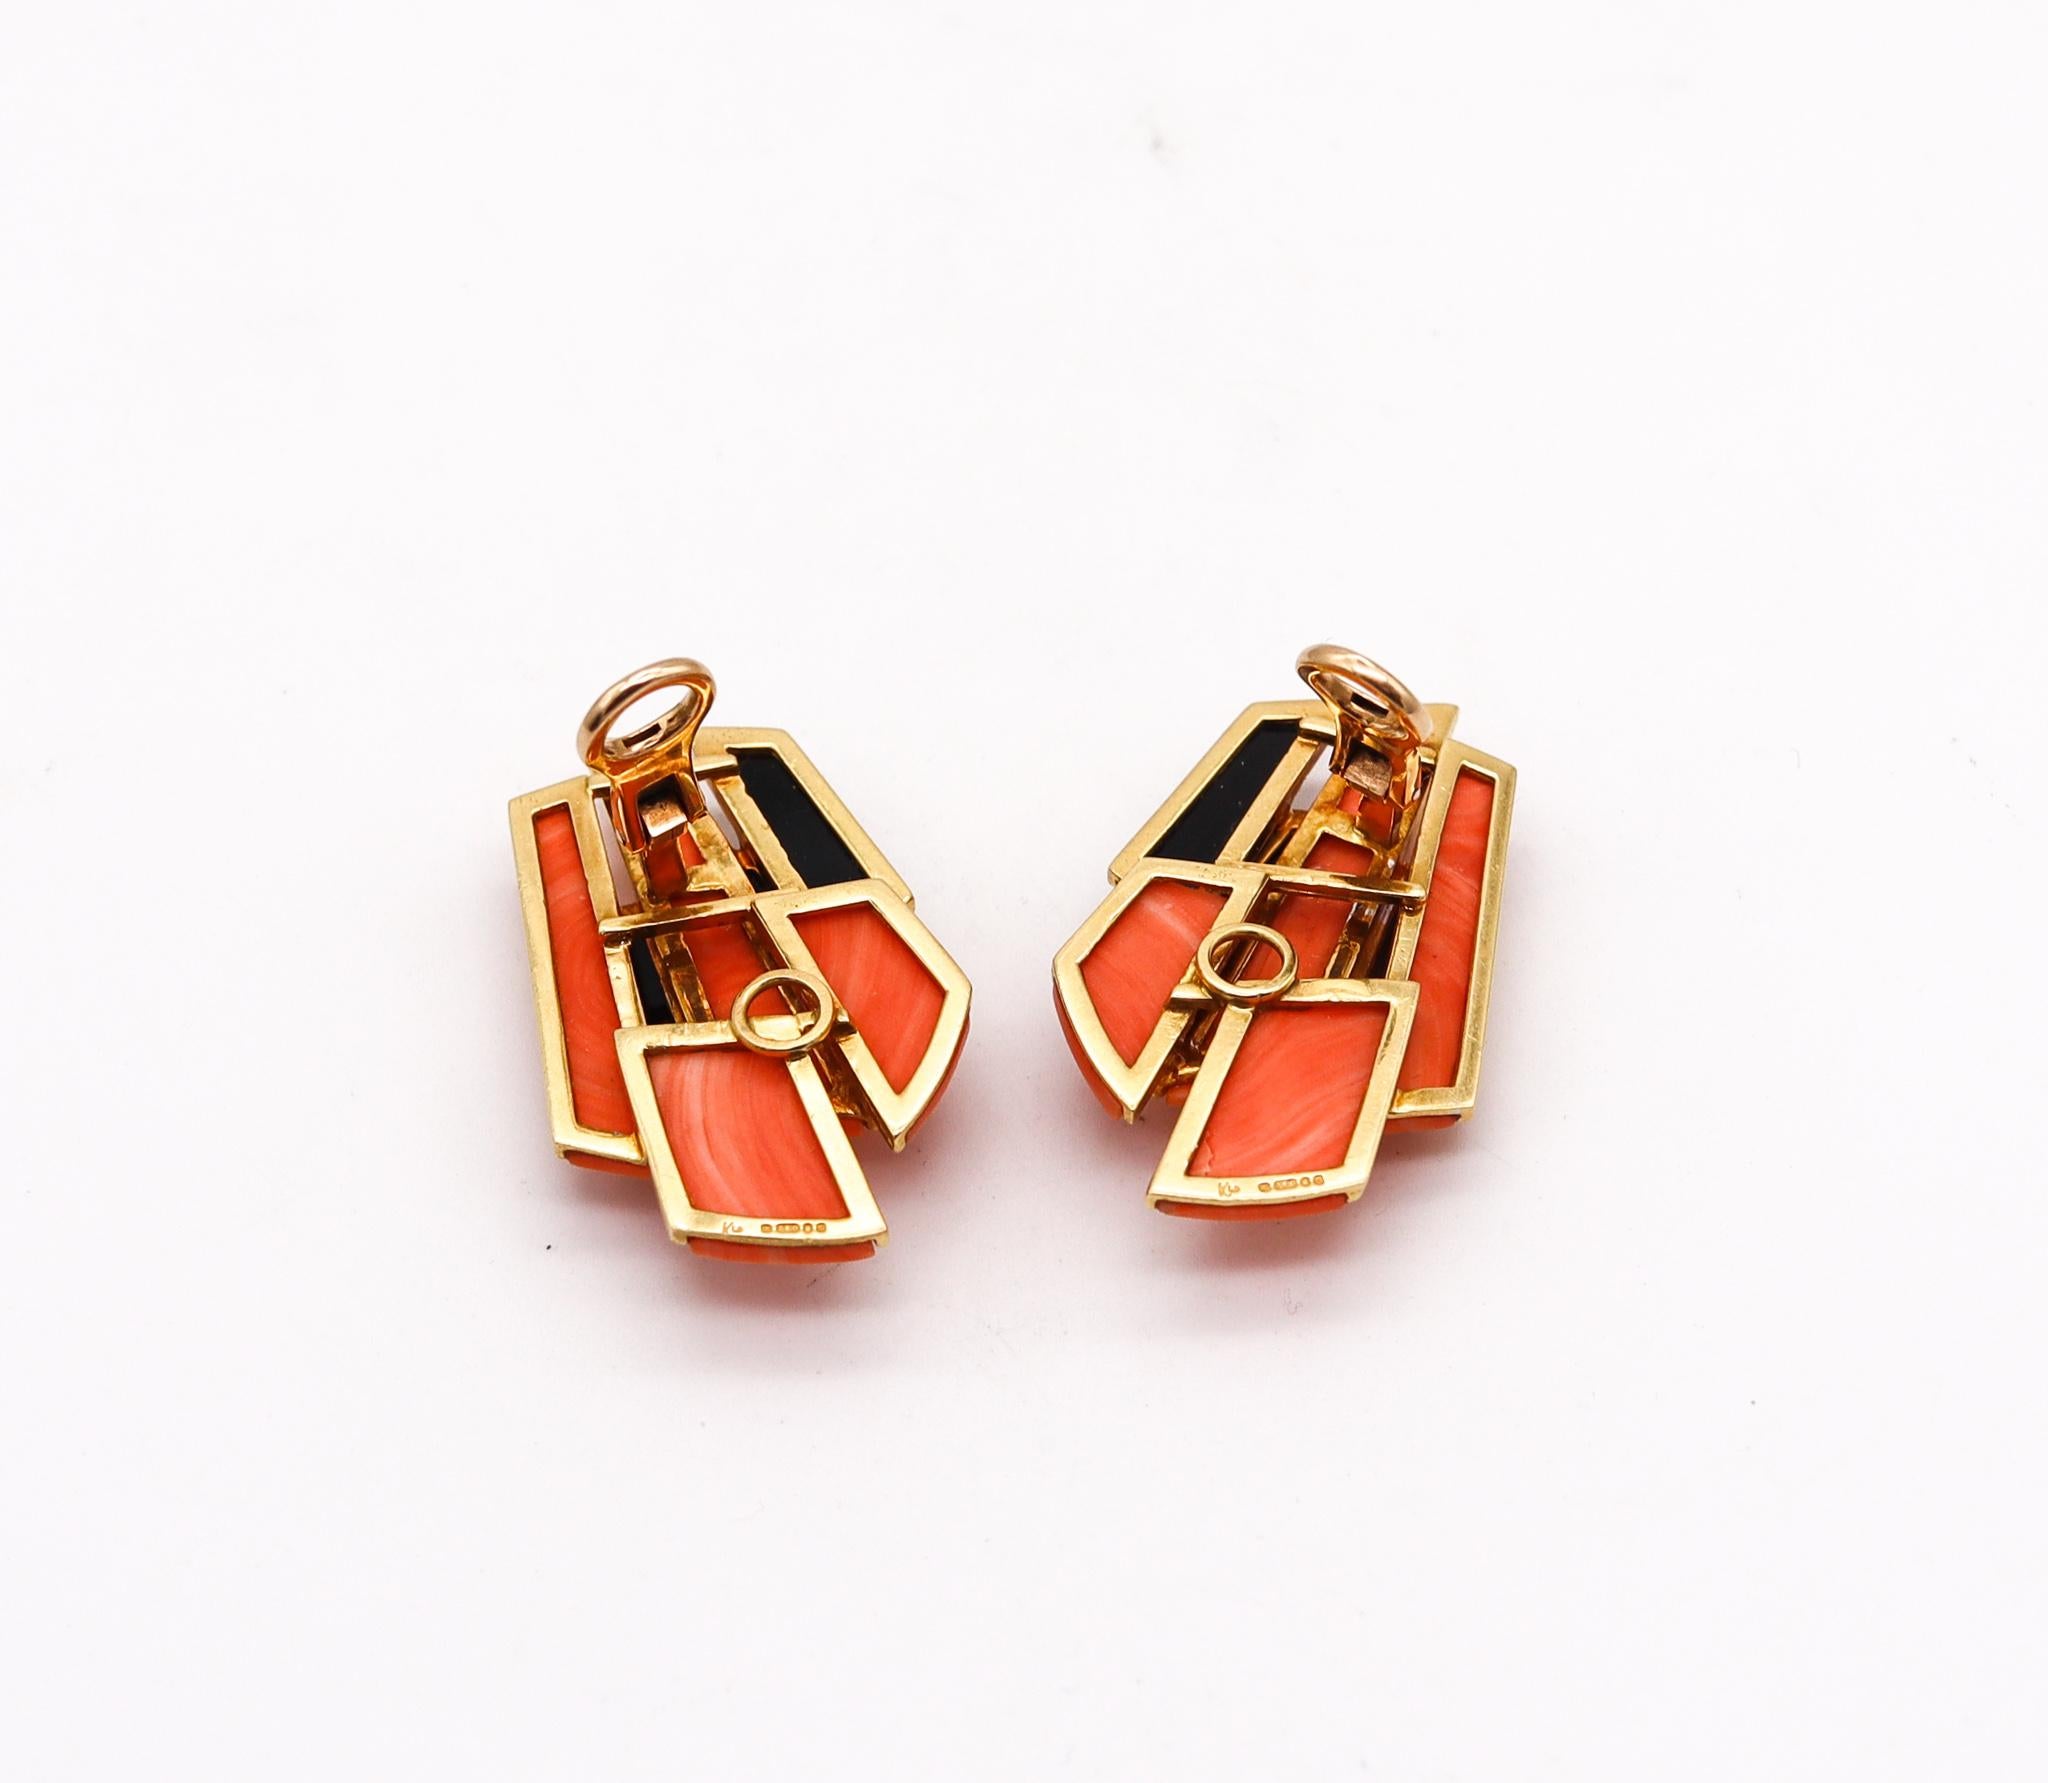 Brilliant Cut Kutchinsky 1968 London Geometric Earrings 18kt Gold with Diamonds Coral and Onyx For Sale